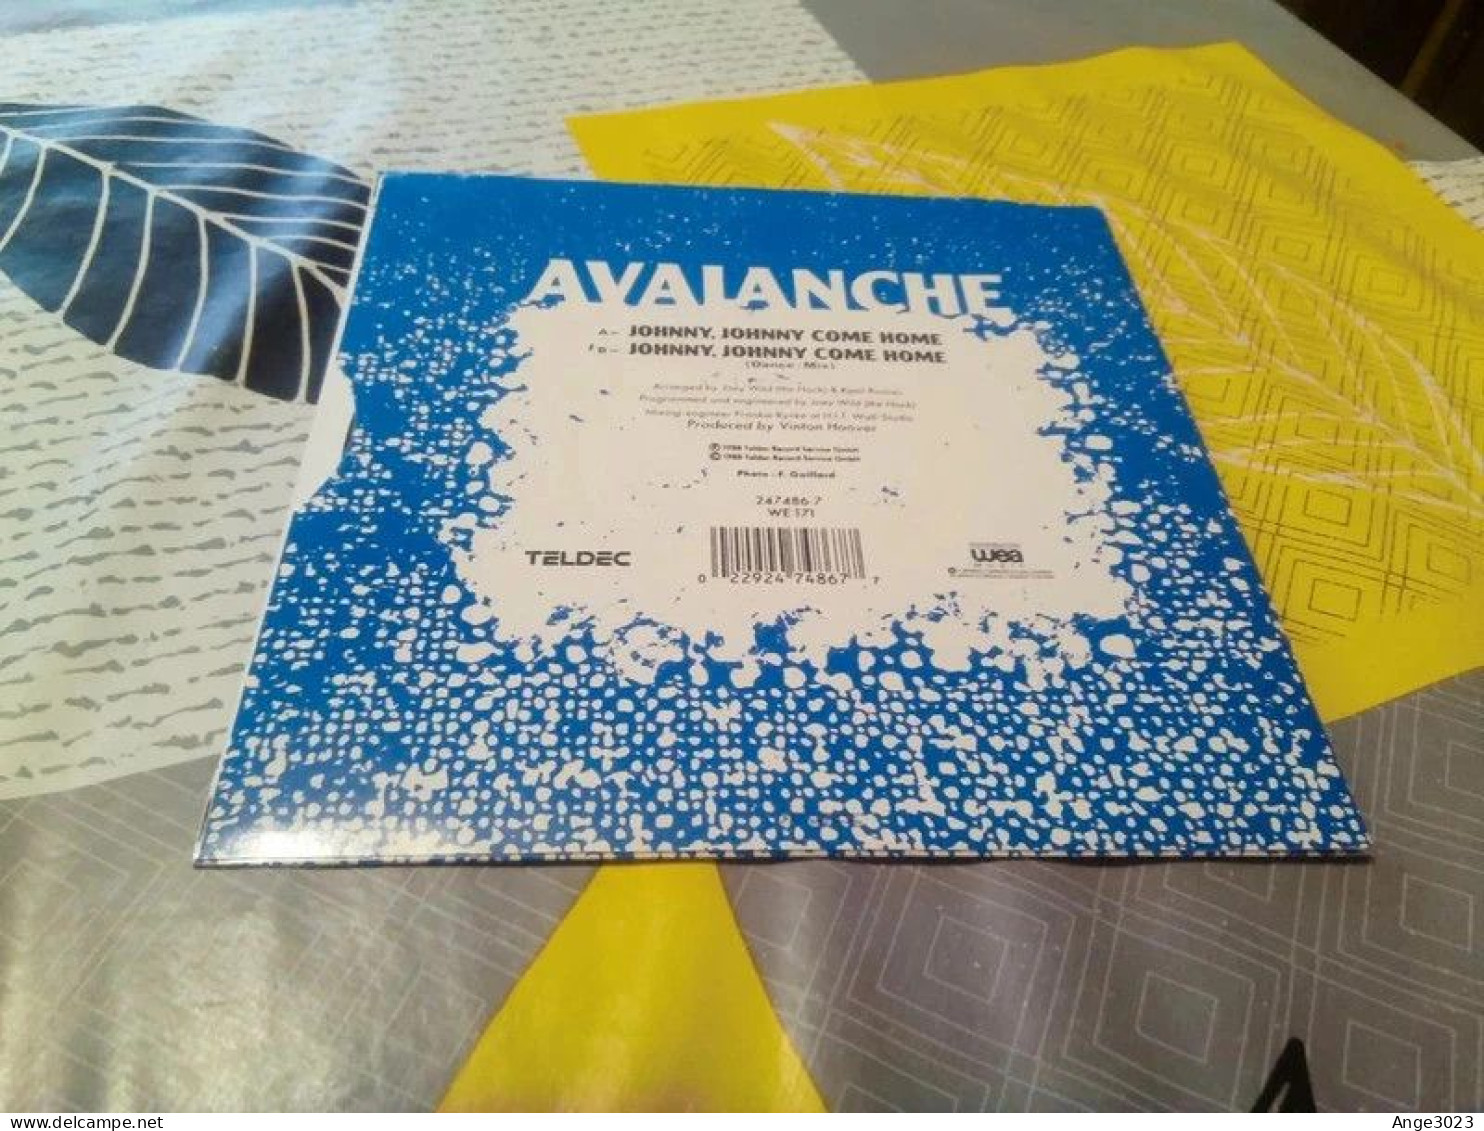 AVALANCHE "Johnny Johnny Come Home" - New Age